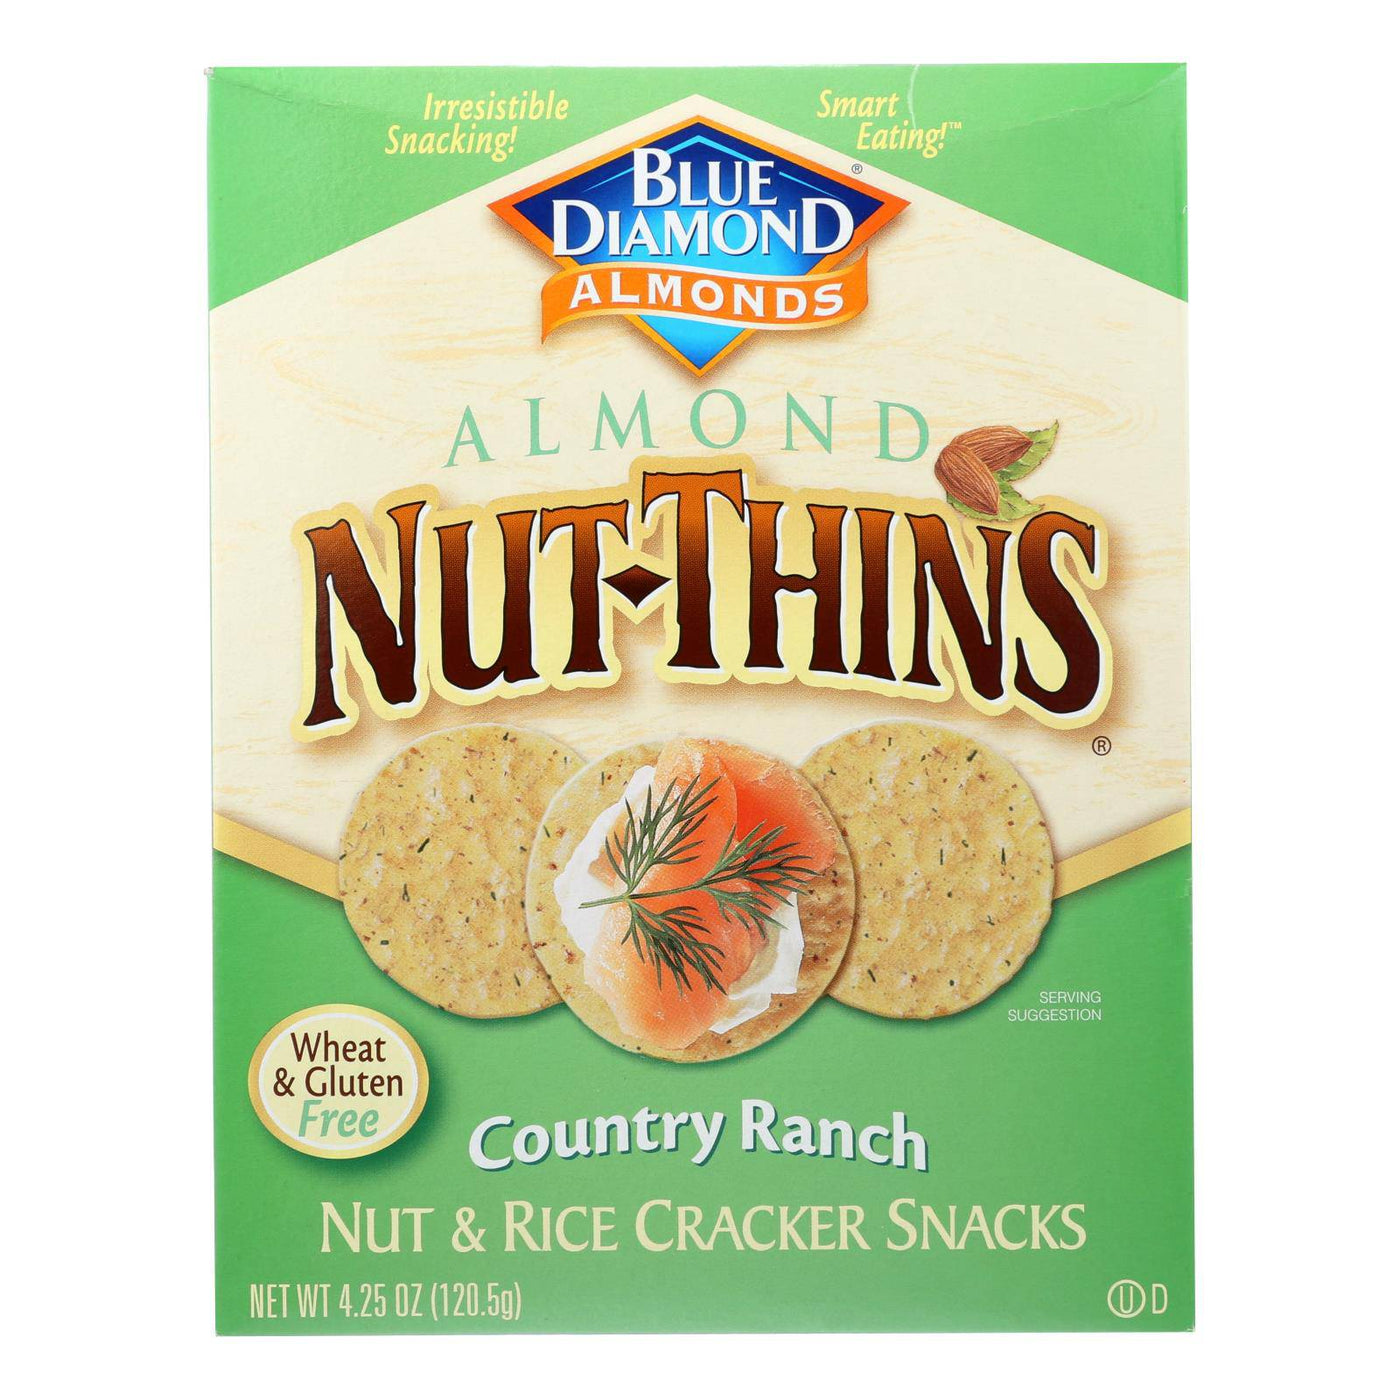 Buy Blue Diamond - Nut Thins - Country Ranch - Case Of 12 - 4.25 Oz.  at OnlyNaturals.us